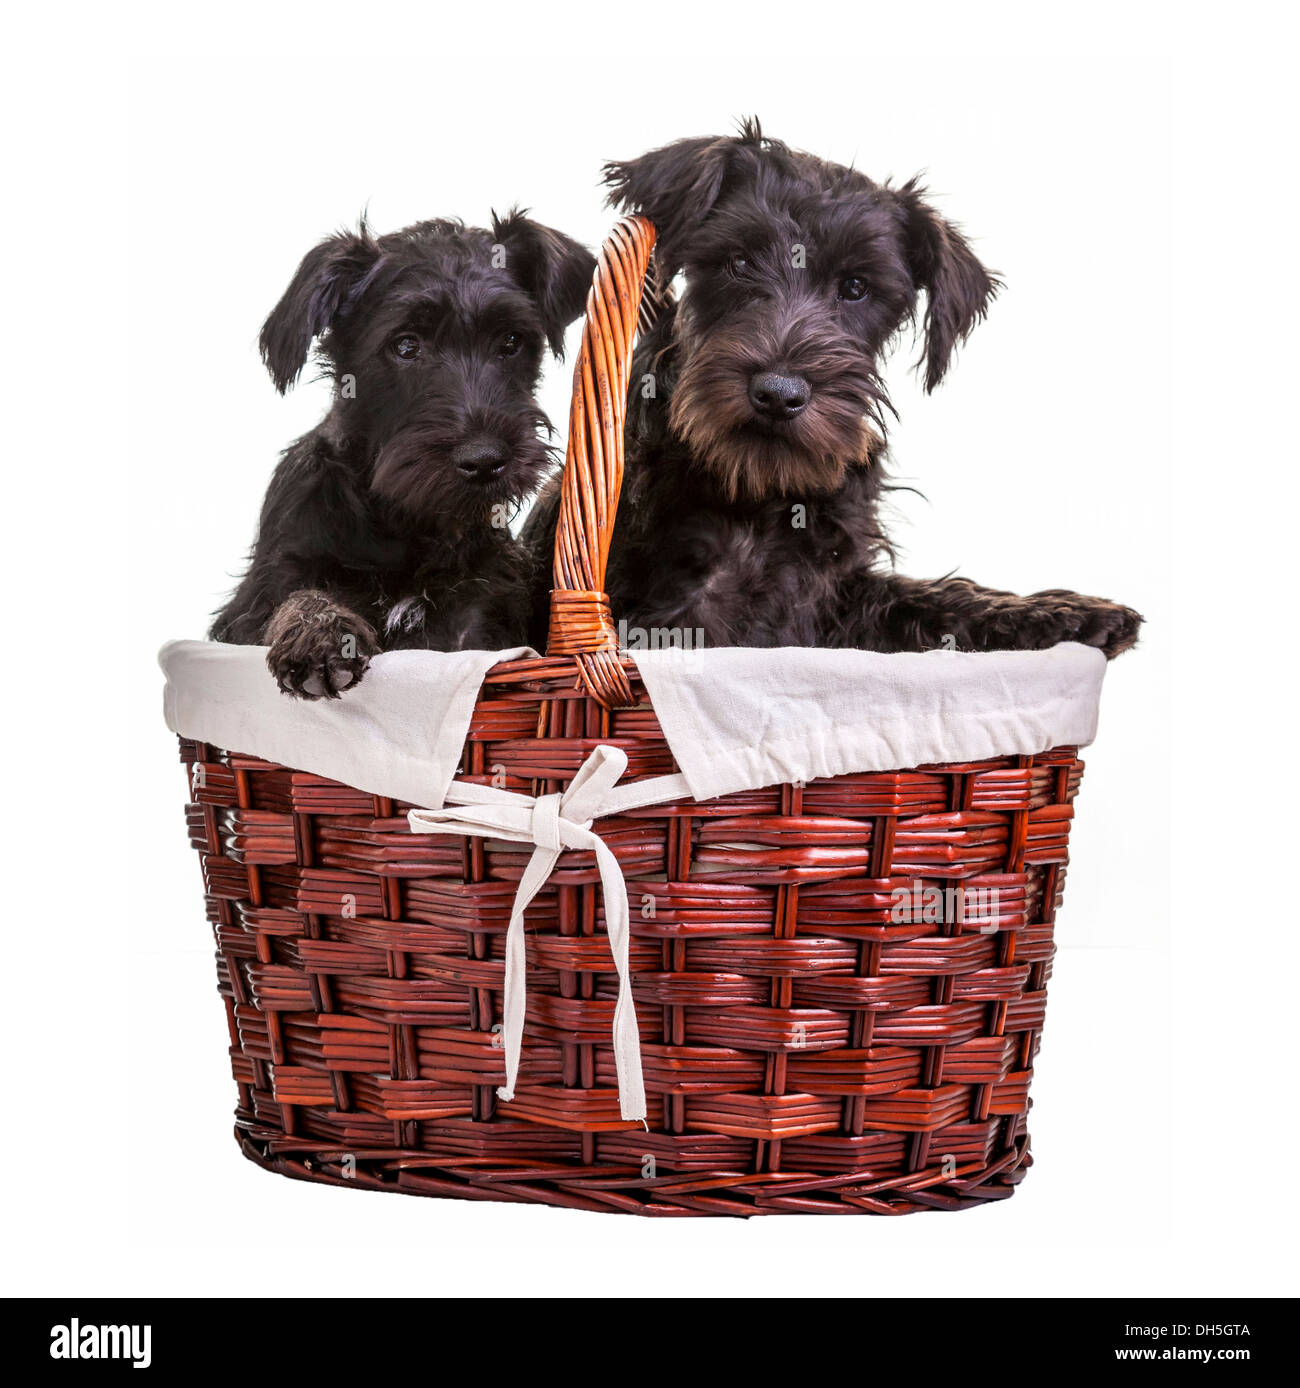 Miniature black schnauzer puppies posing in a basket on a white background Stock Photo